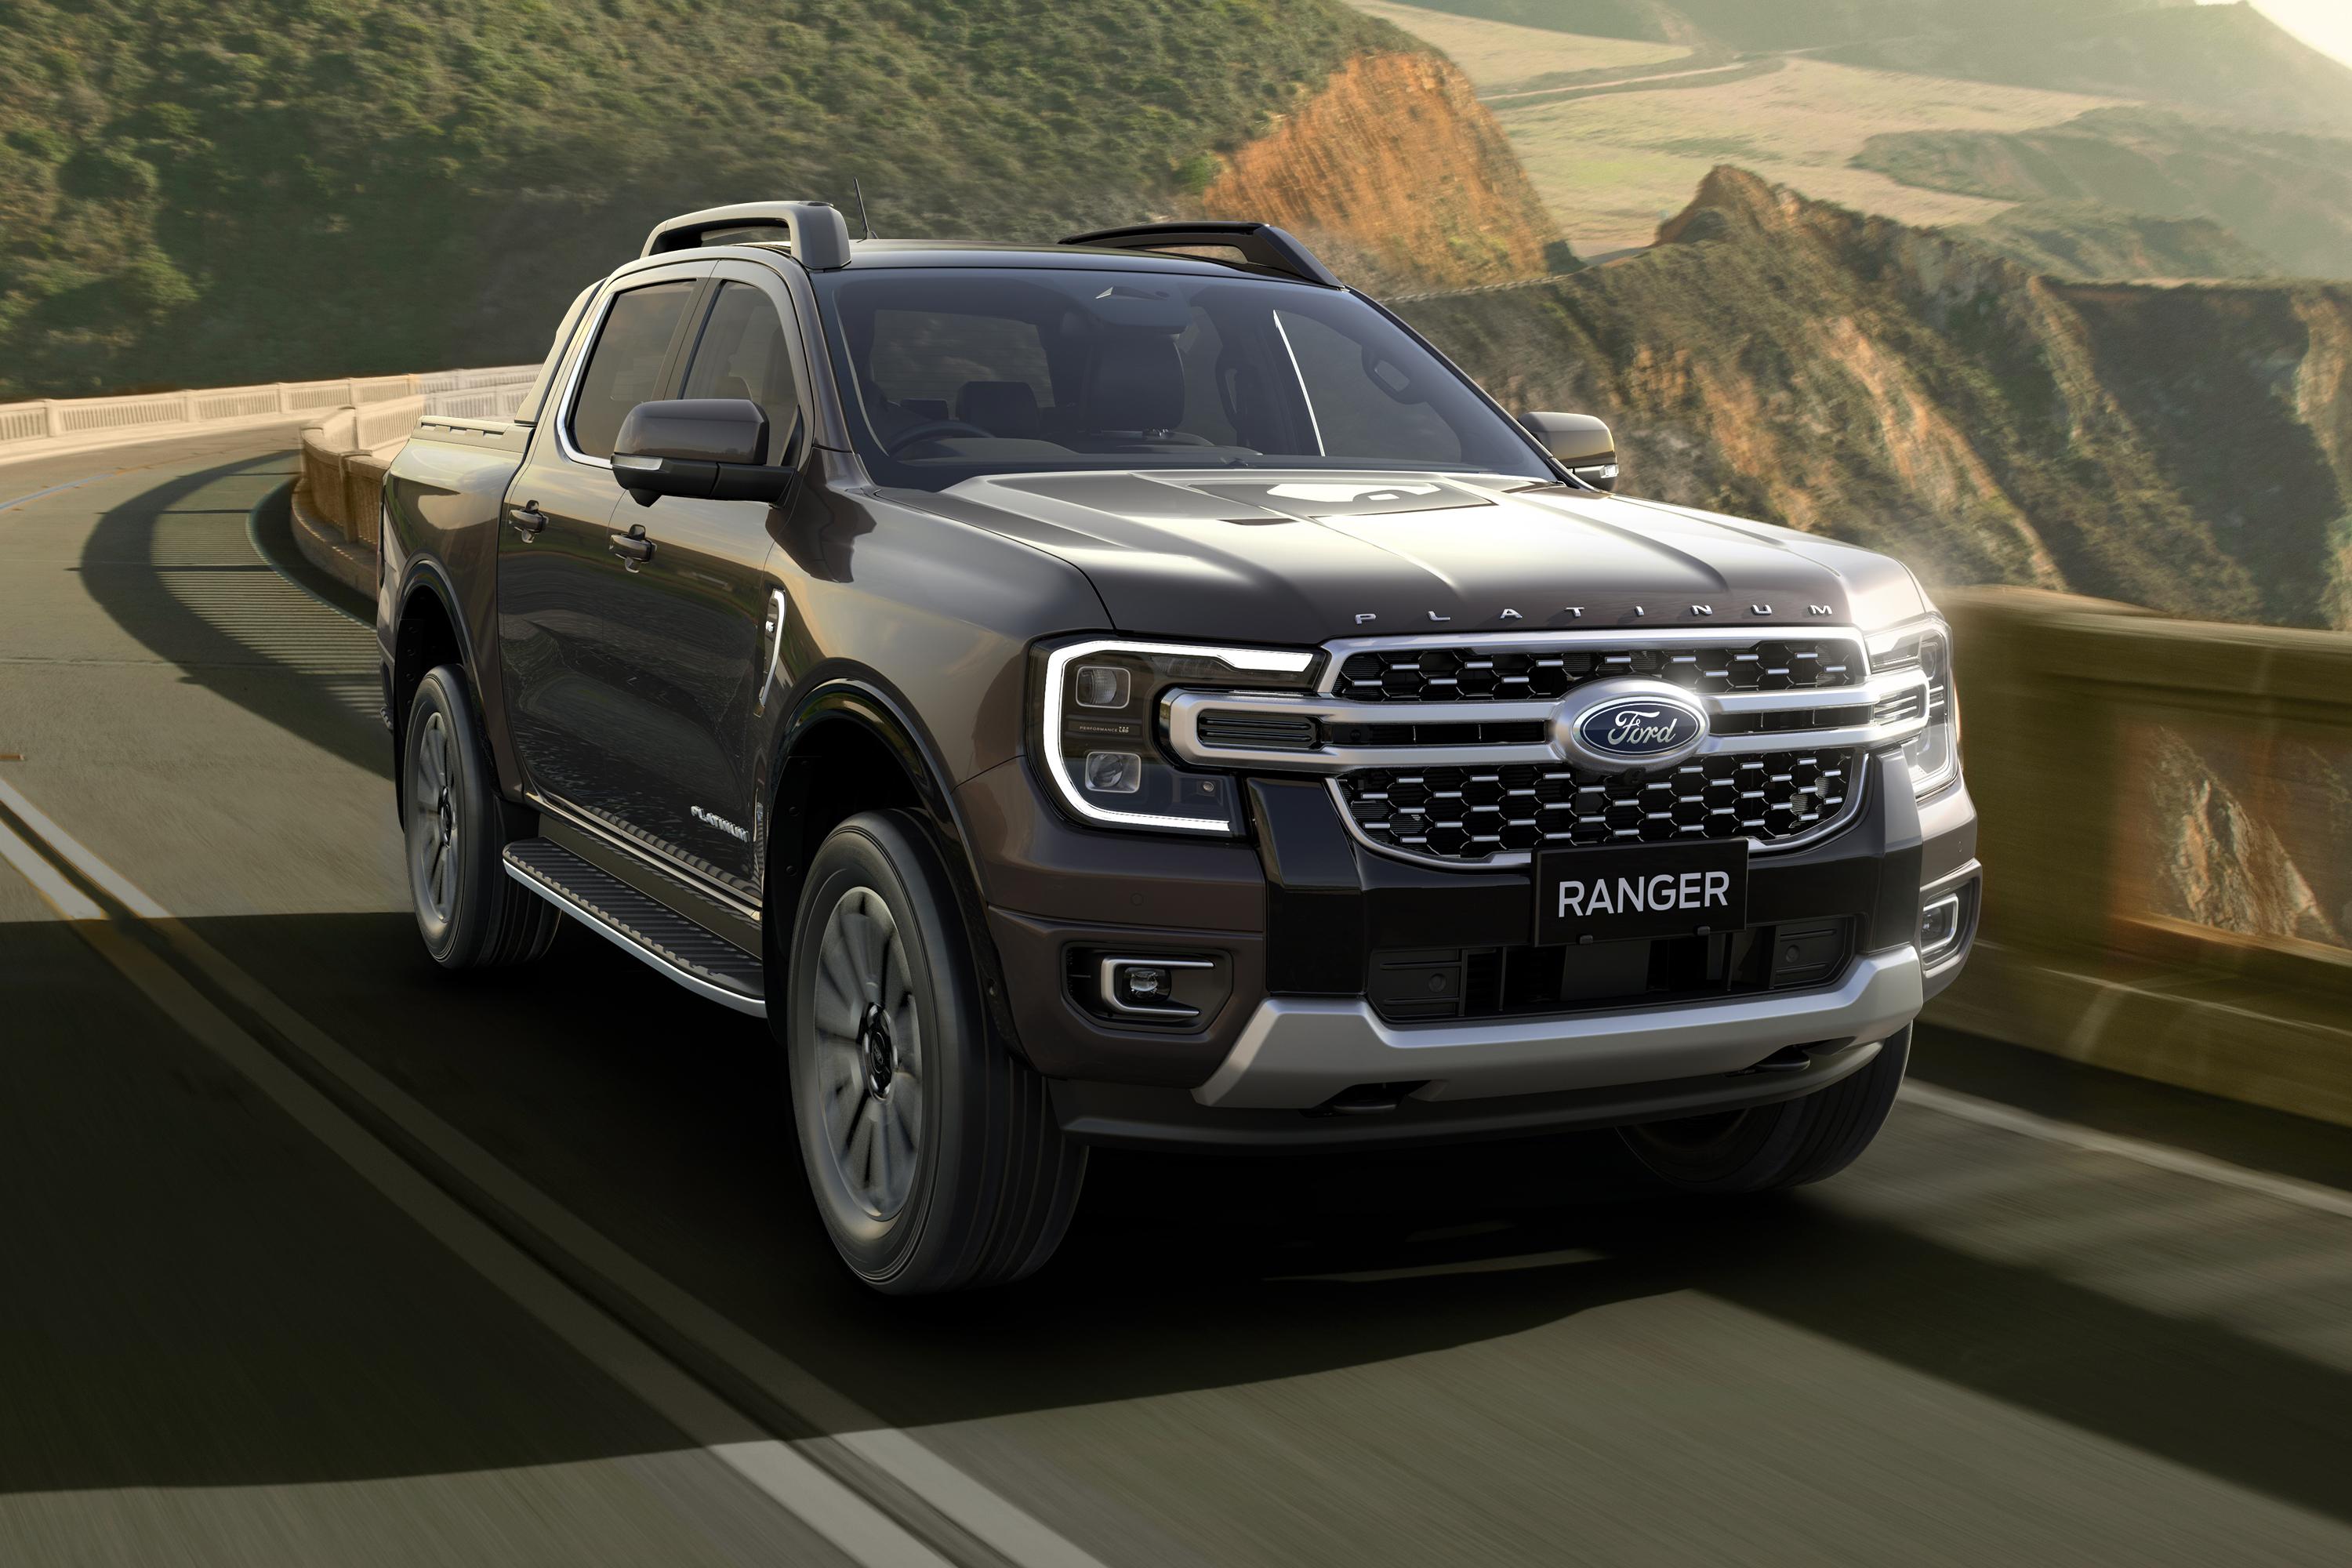 5 electric pickups due to arrive in 2023 – BEQ Technology